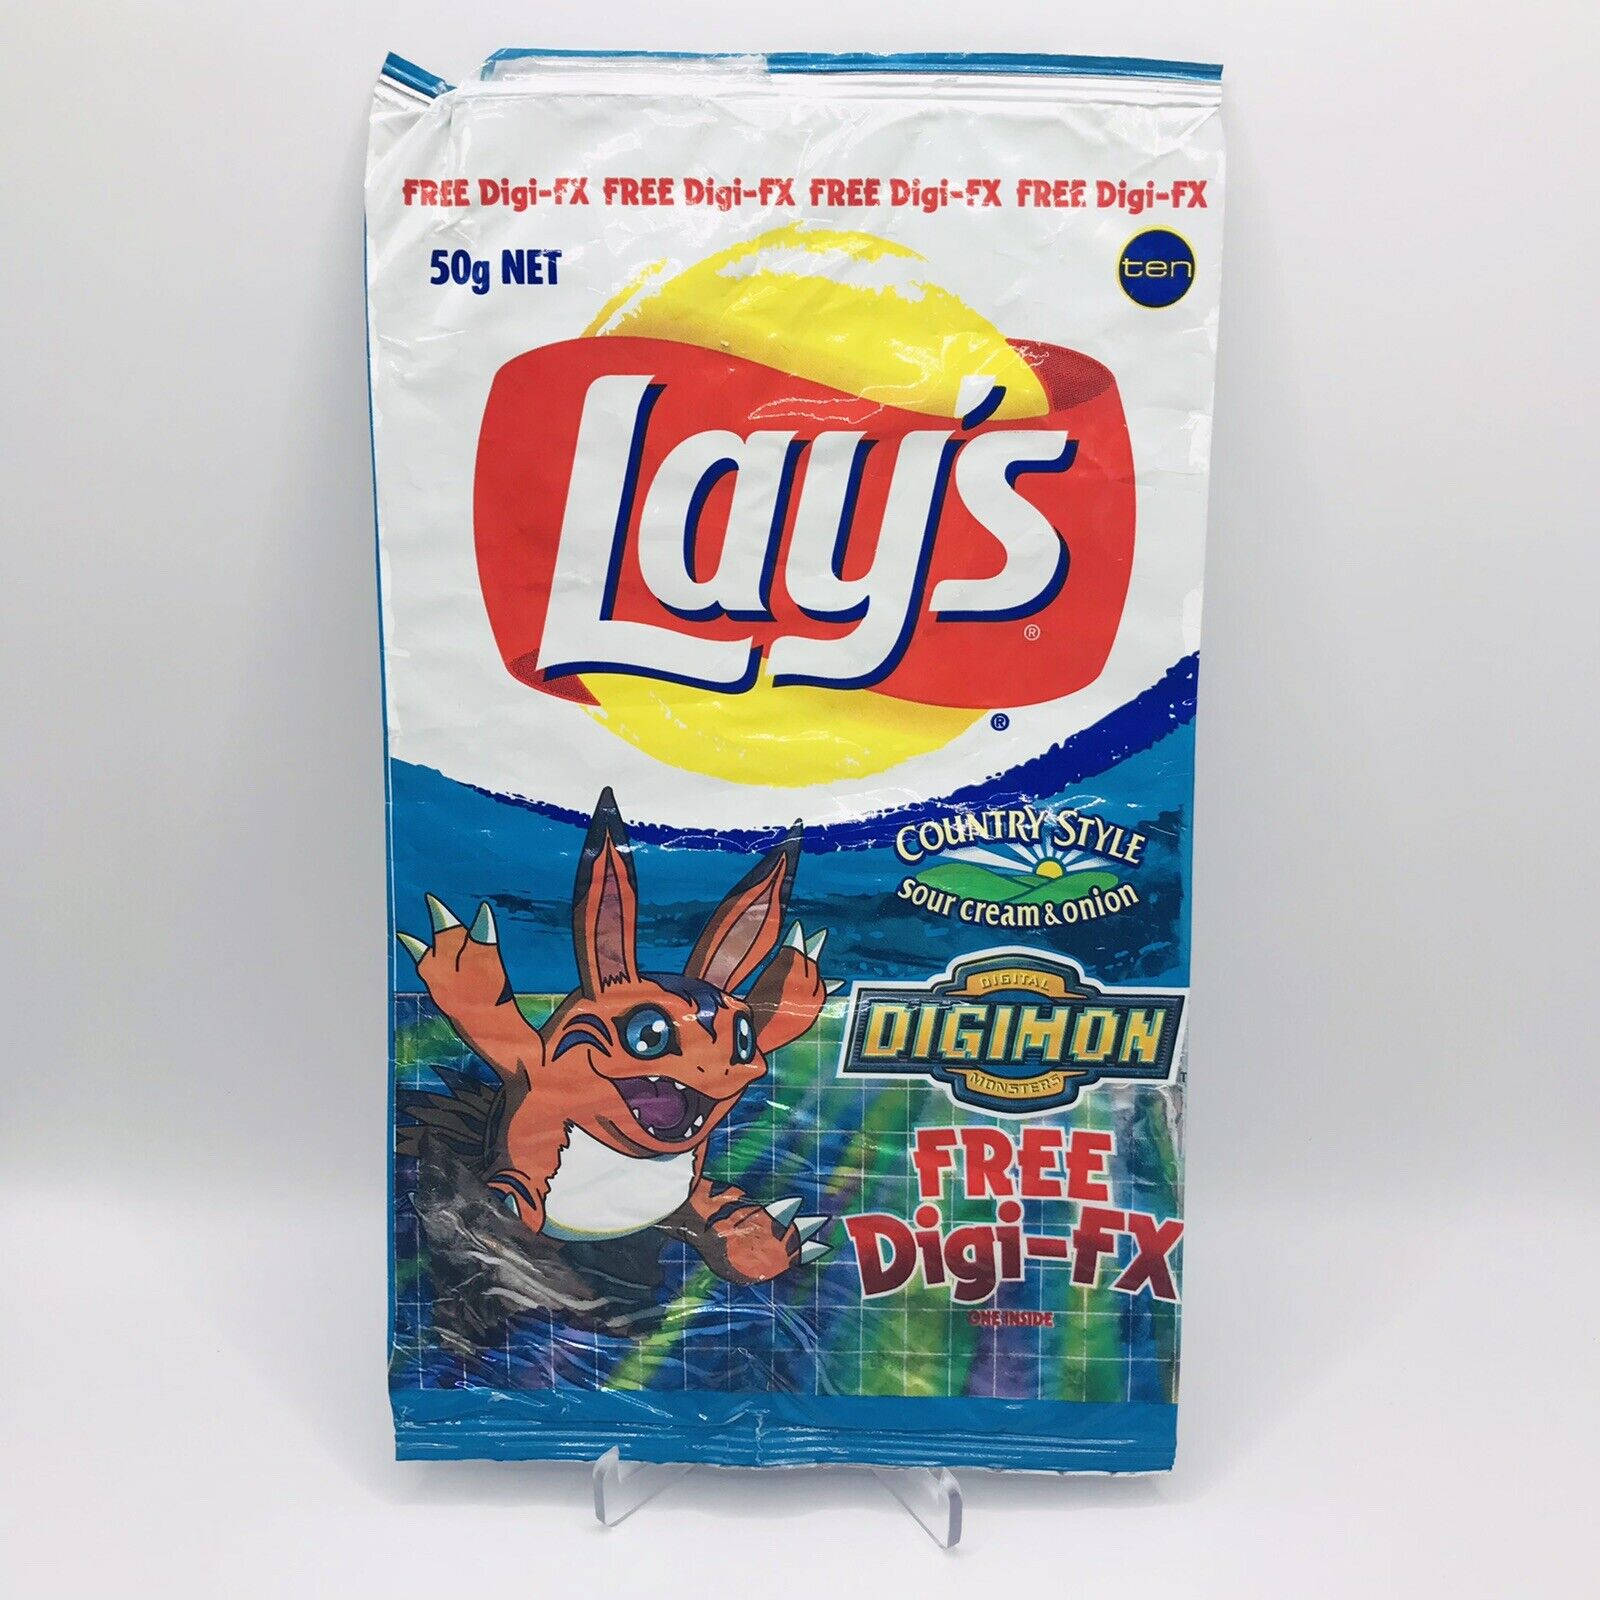 HOLY GRAIL DIGIMON 3D Tazo Lays Chip Packet Cheez TV ￼￼￼2000 Promo DIGI-FX